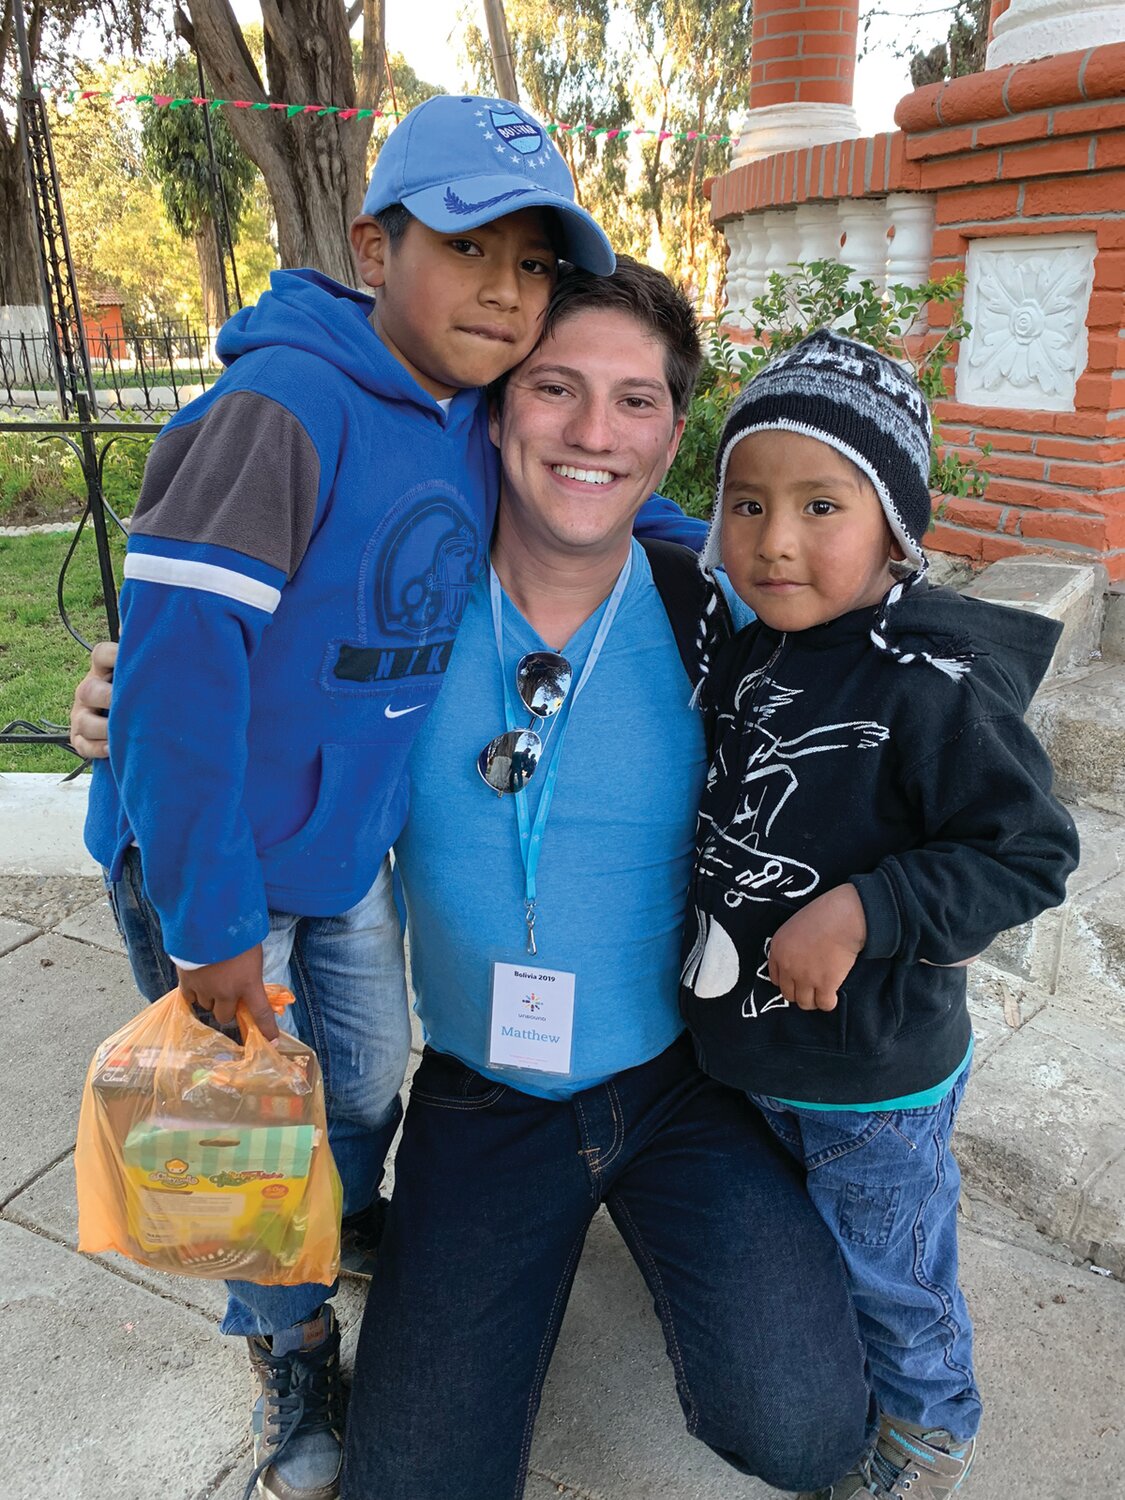 MAKING A DIFFERENCE: Matthew Gebhart (center) smiles as he visits Bolivia to see the boy he sponsors, Jhamil (left), and his brother, sponsored by Gebhart’s parents, Jhafet in 2019. (Submitted Photo)